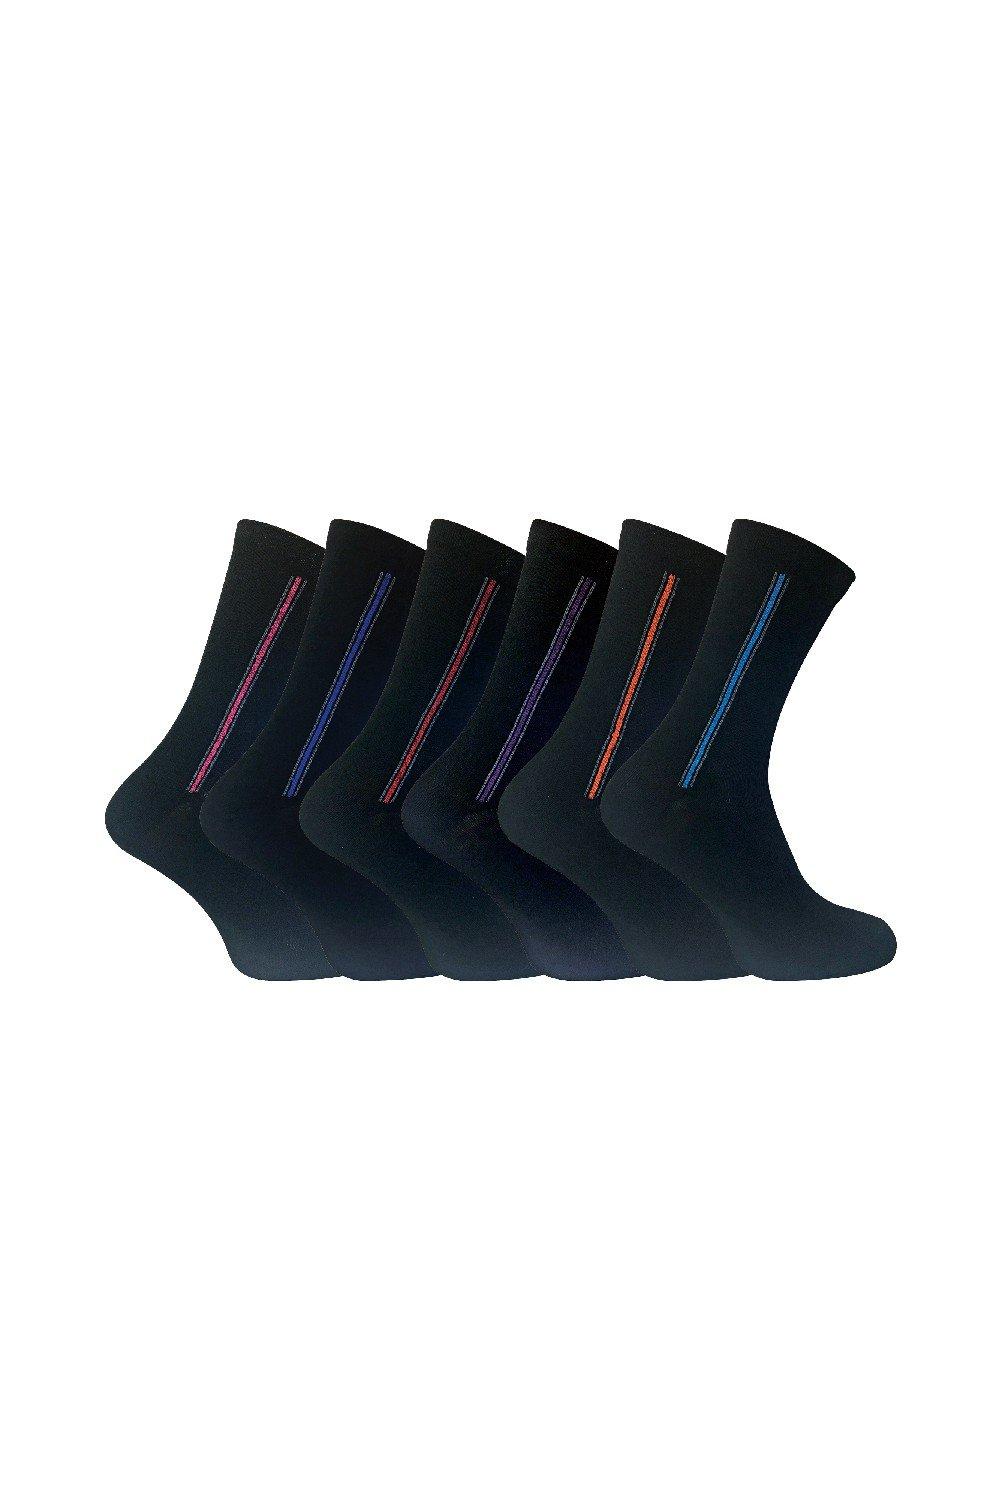 6 Pairs Patterned Coloured Soft Cotton Dress Socks